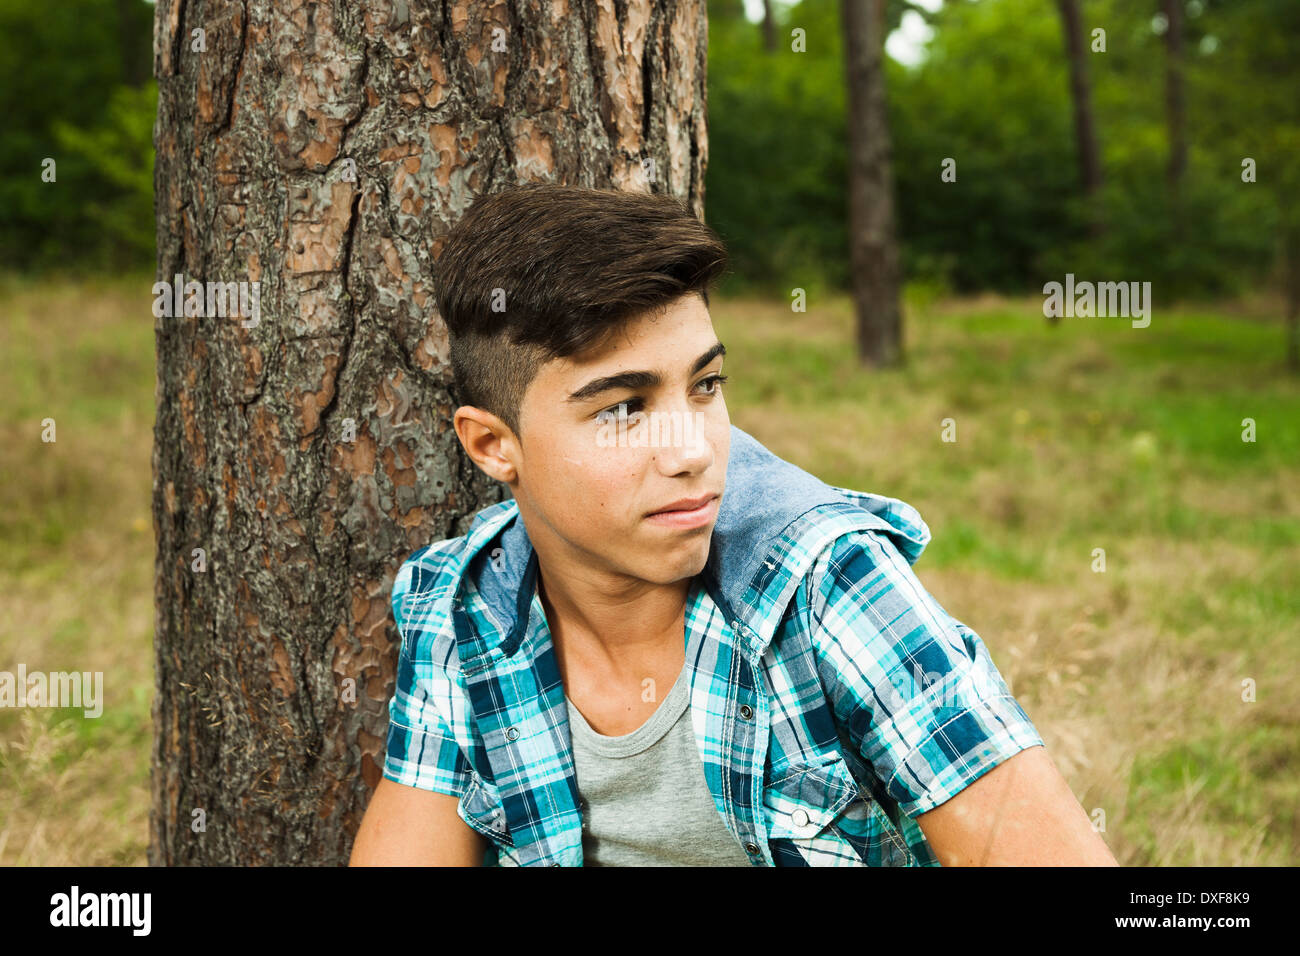 Close-up portrait of boy sitting beside tree in park, Germany Stock Photo